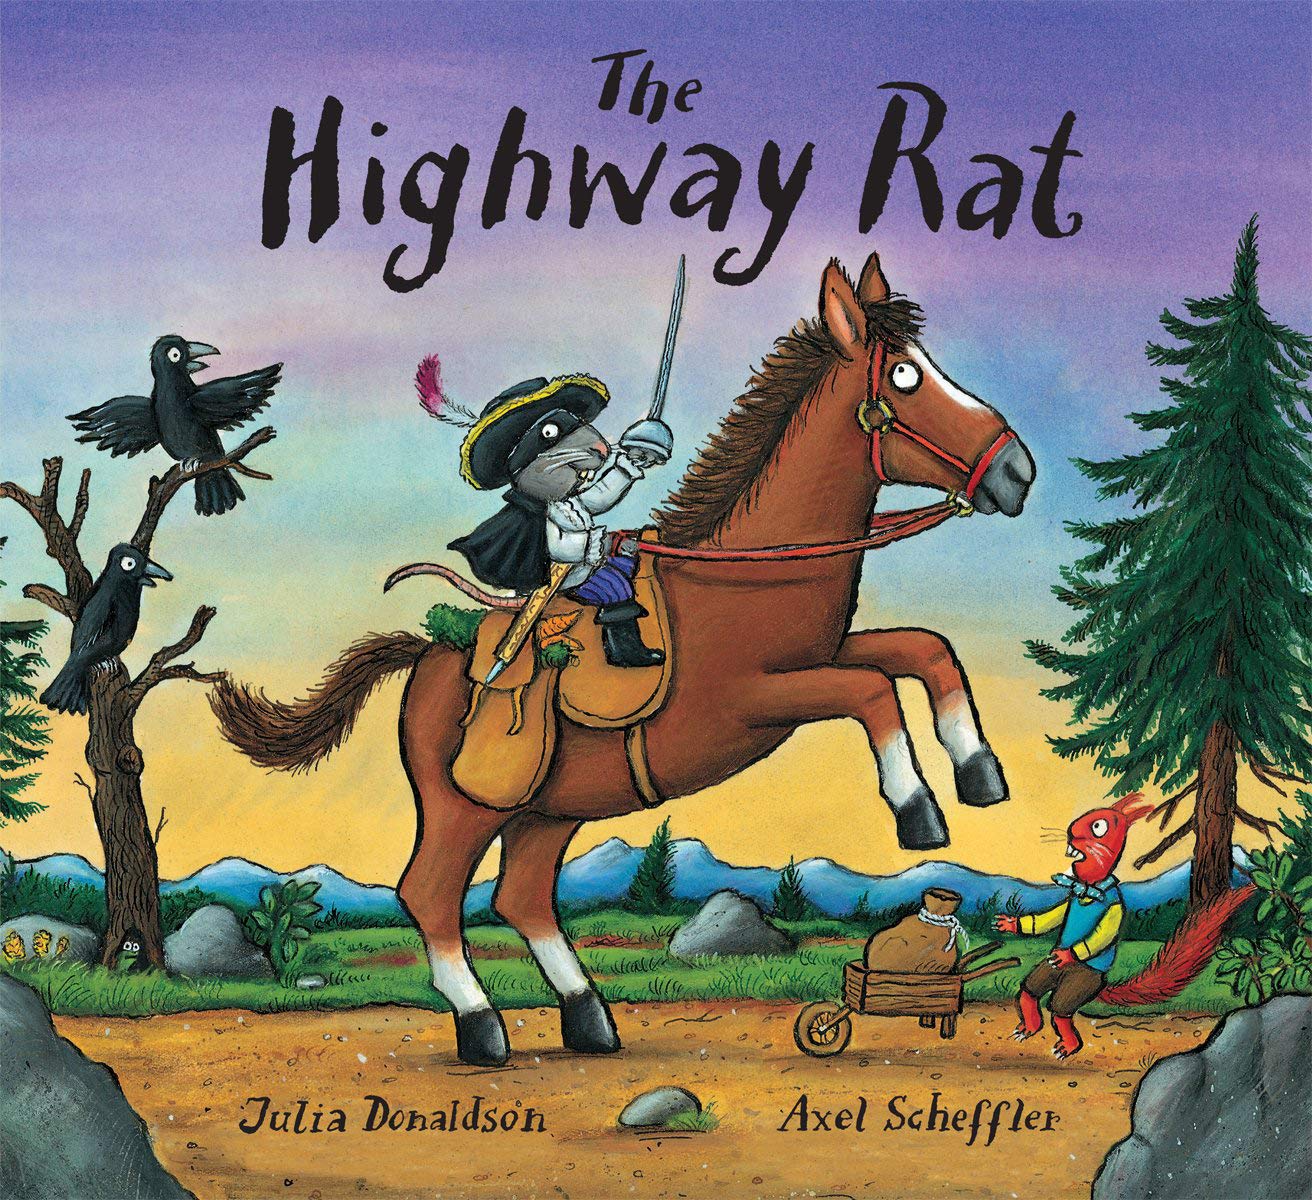 Book cover of the Highway Rat by Julia Donaldson